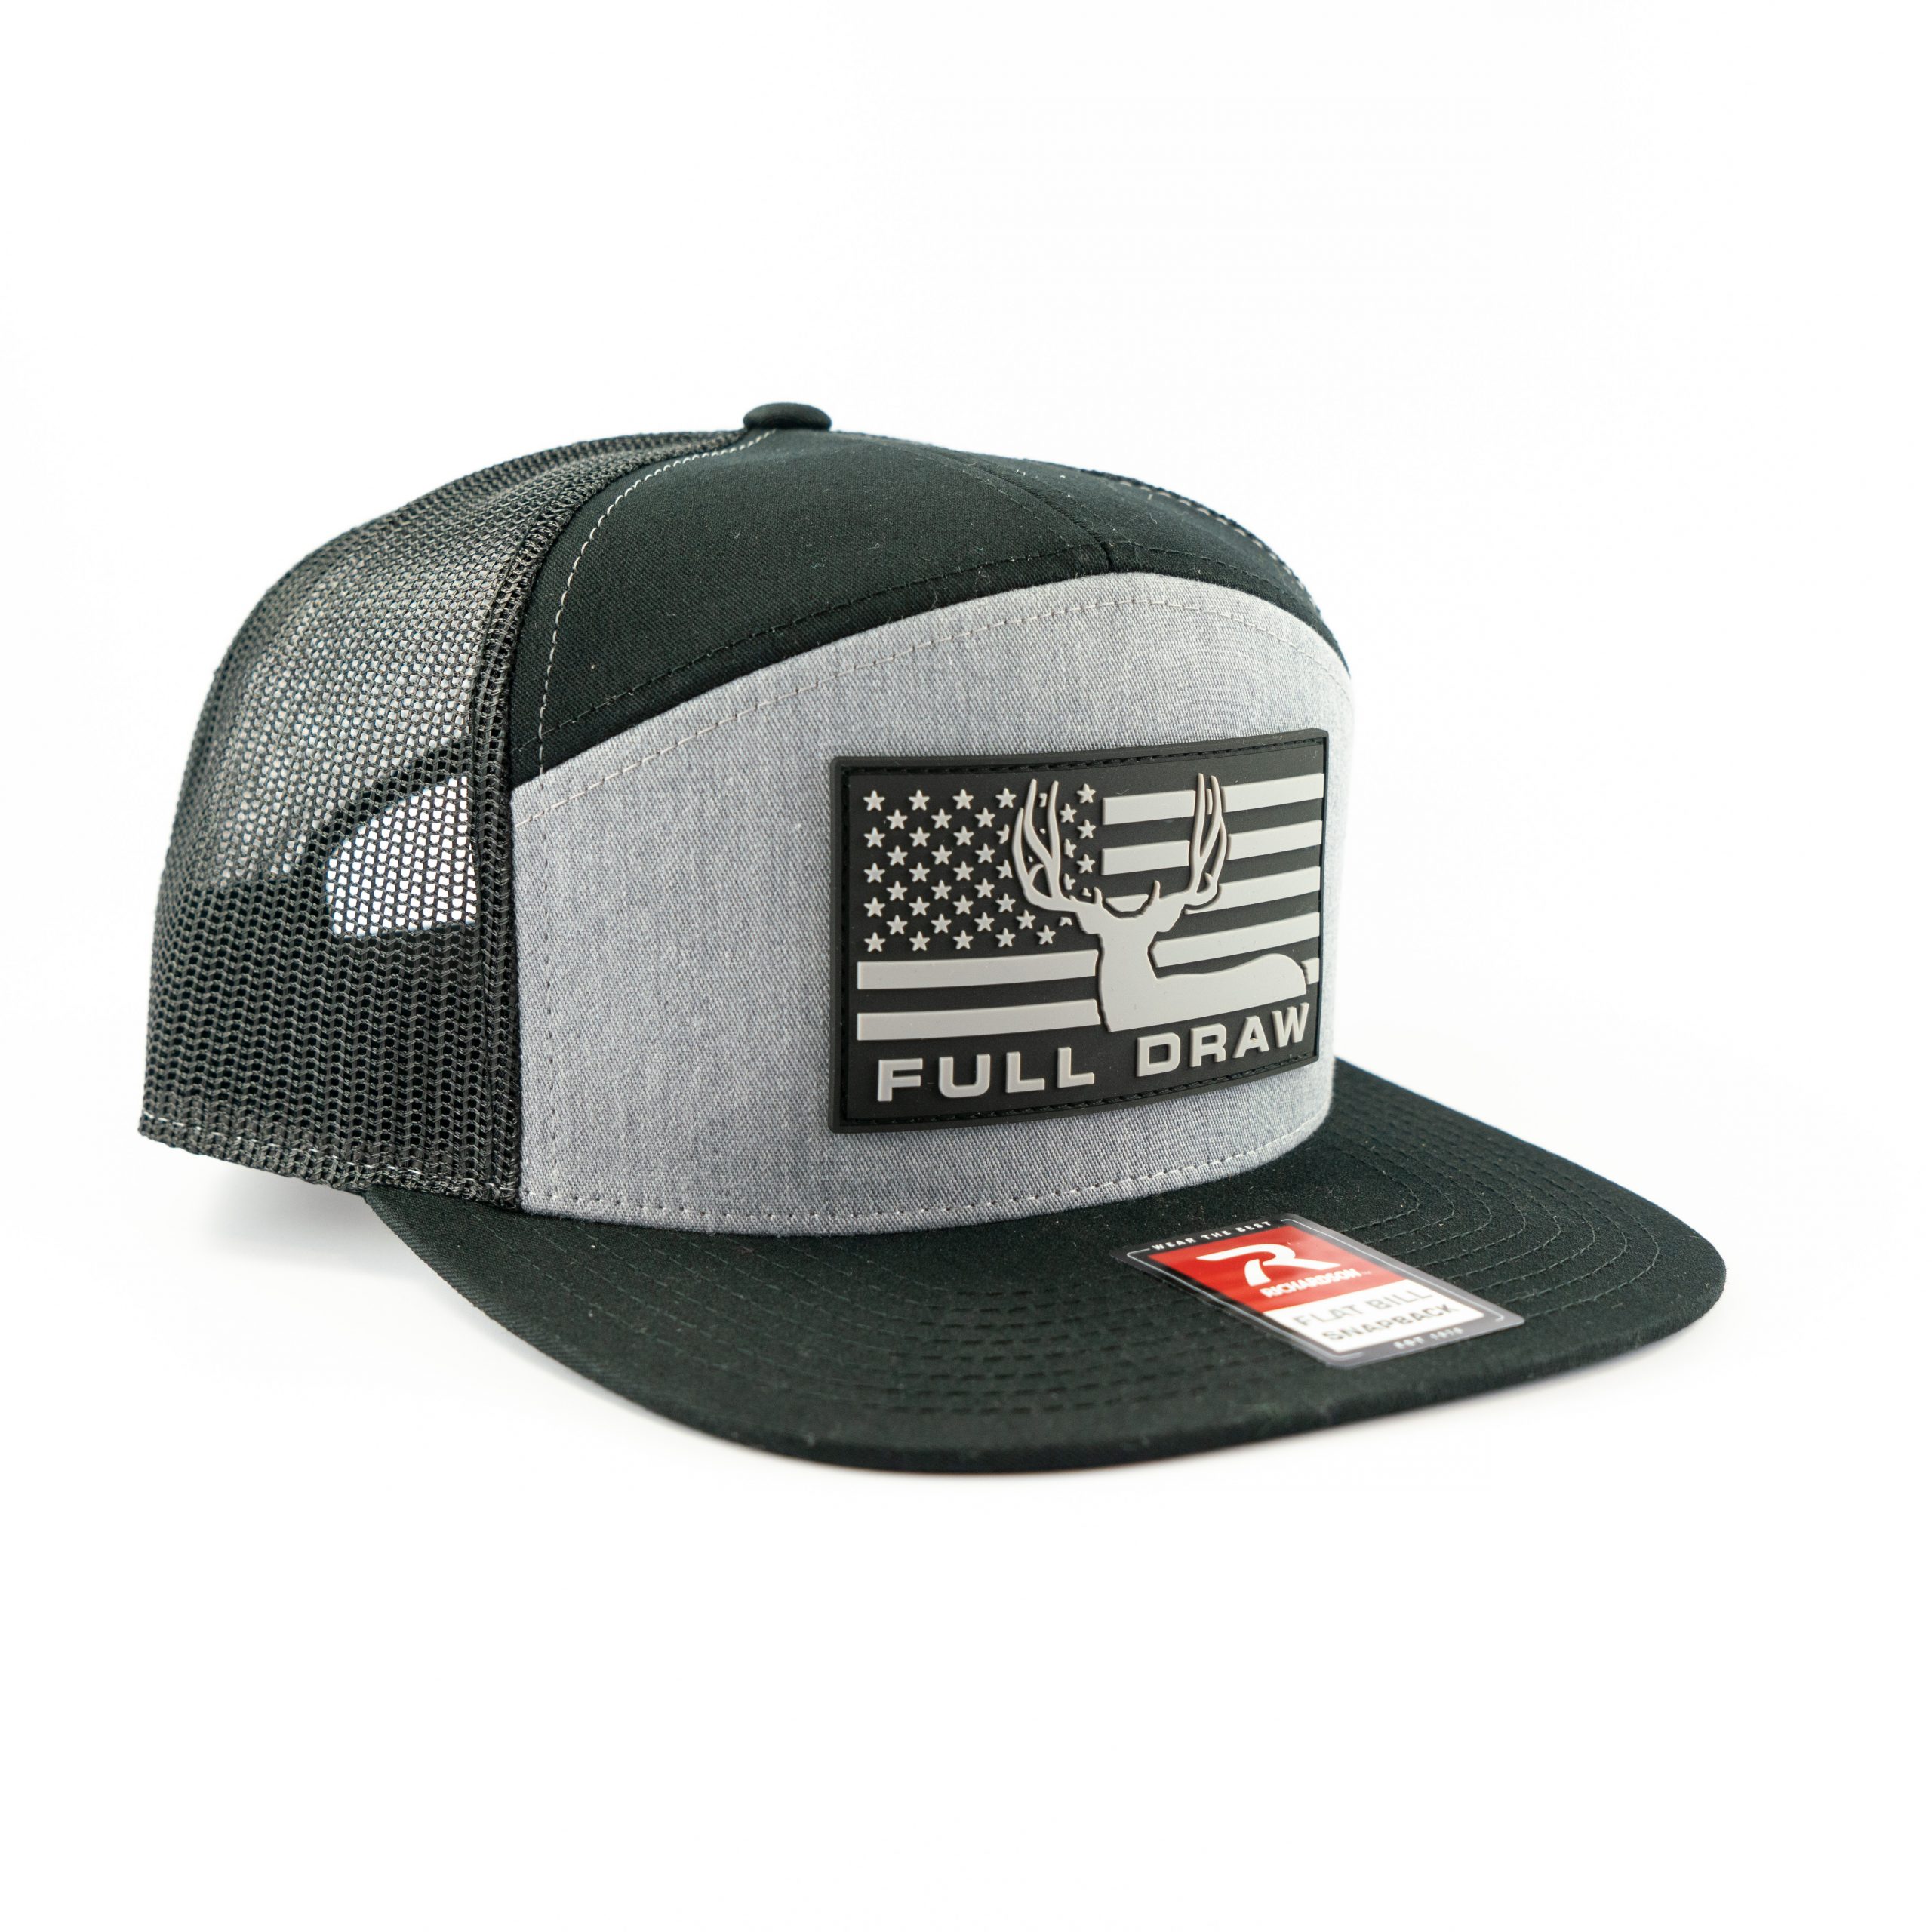 One Legging it Around #nyhoff Leather Hashtag Black Patch Engraved Trucker Hat 